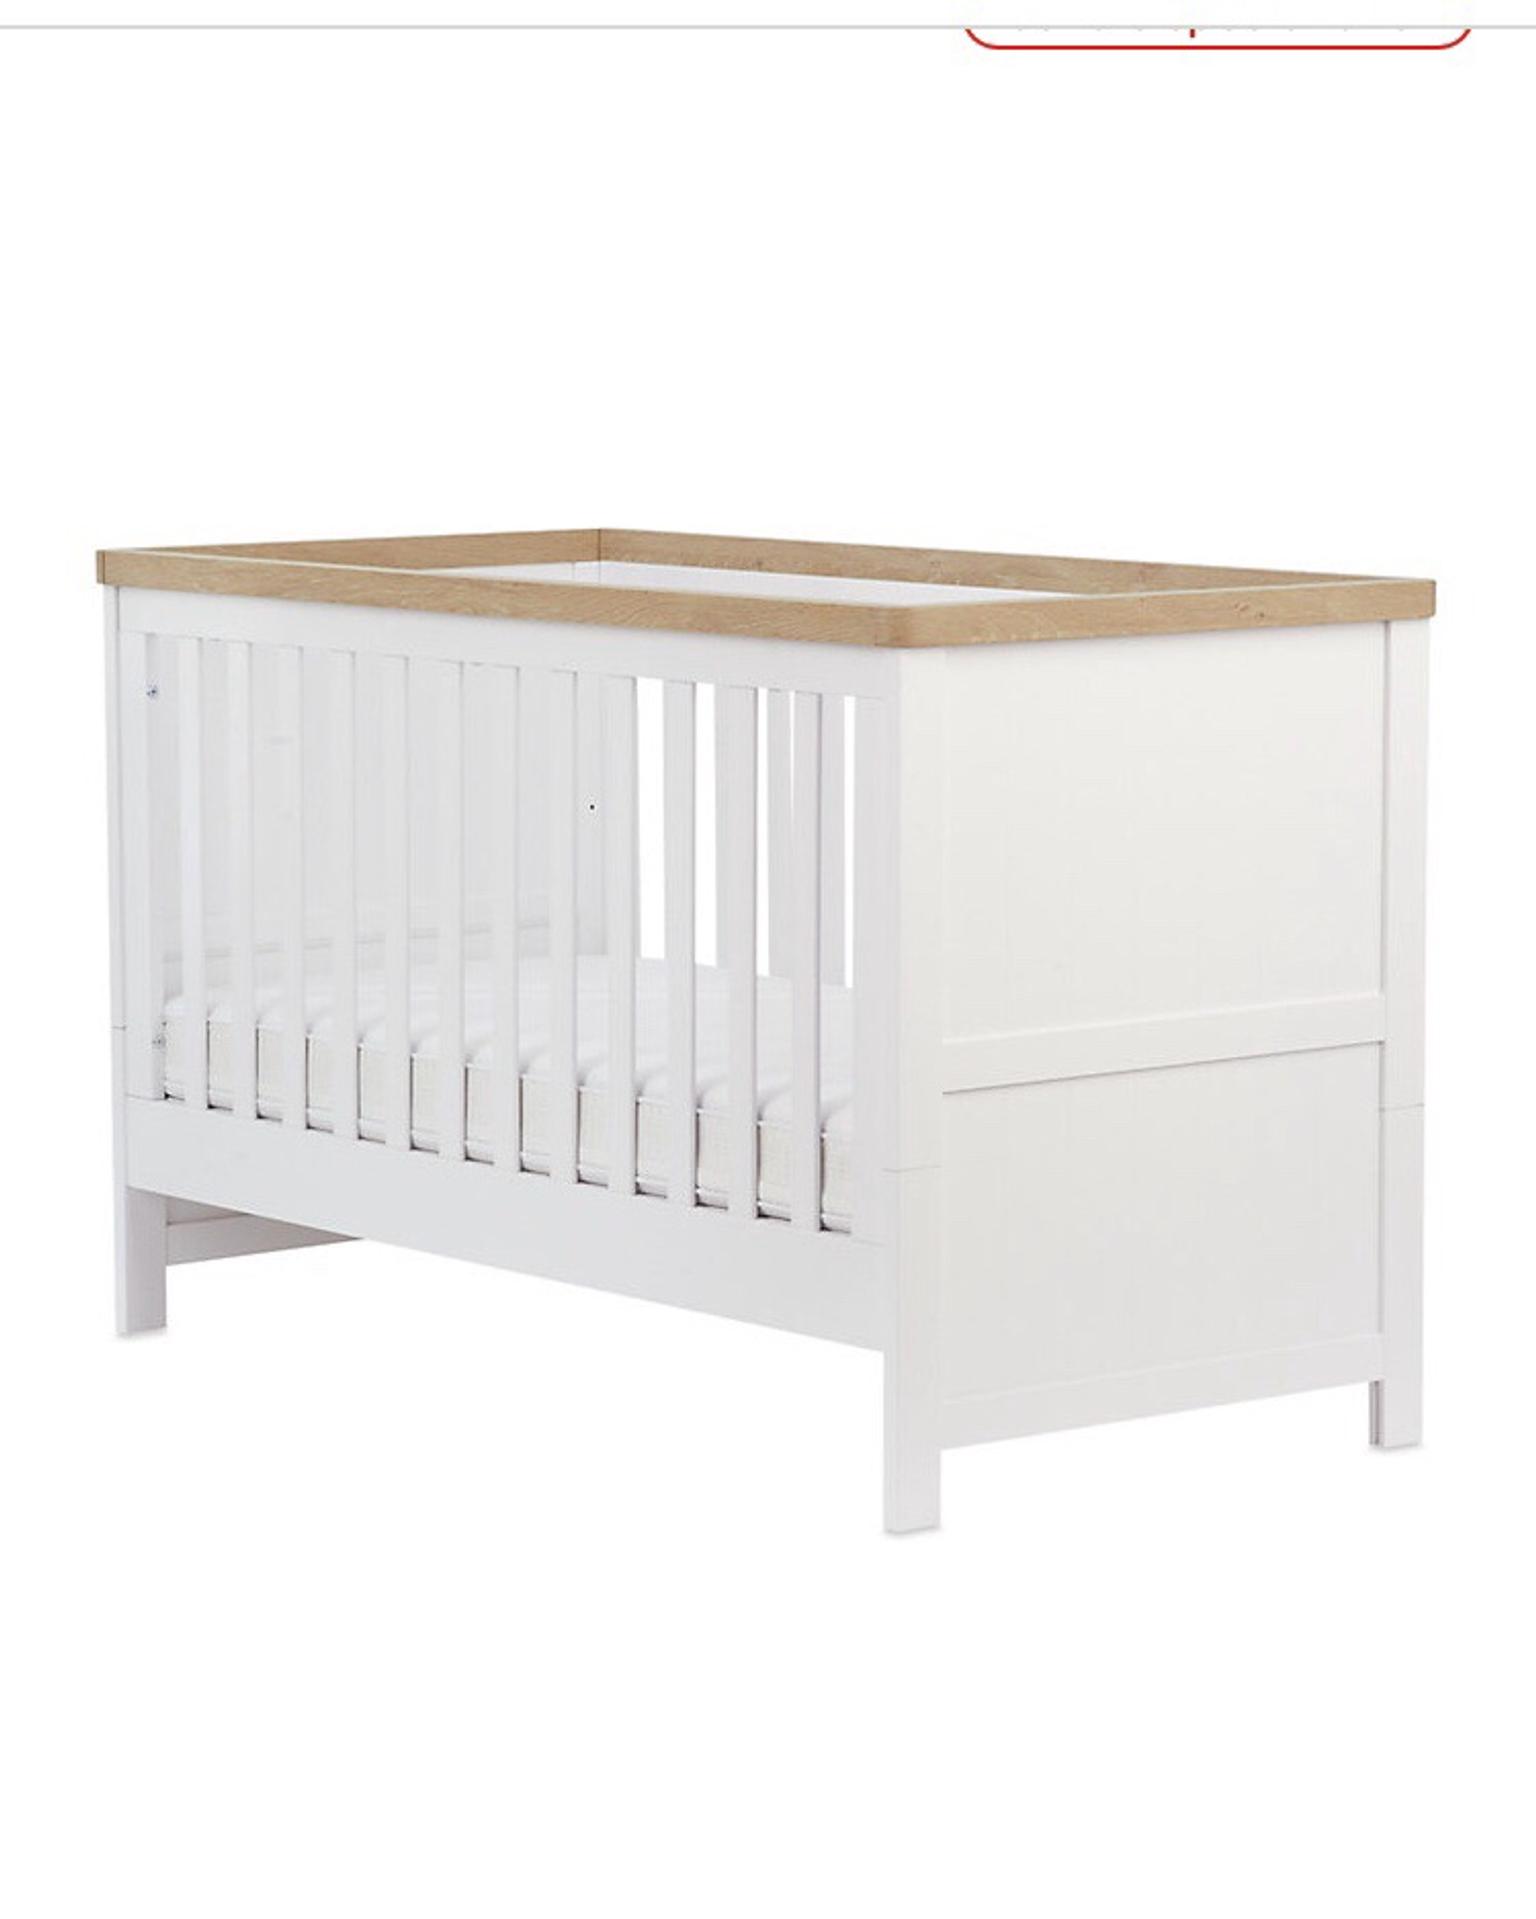 Mothercare Lulworth Cot Bed With Mattress In Stretton Fur 150 00